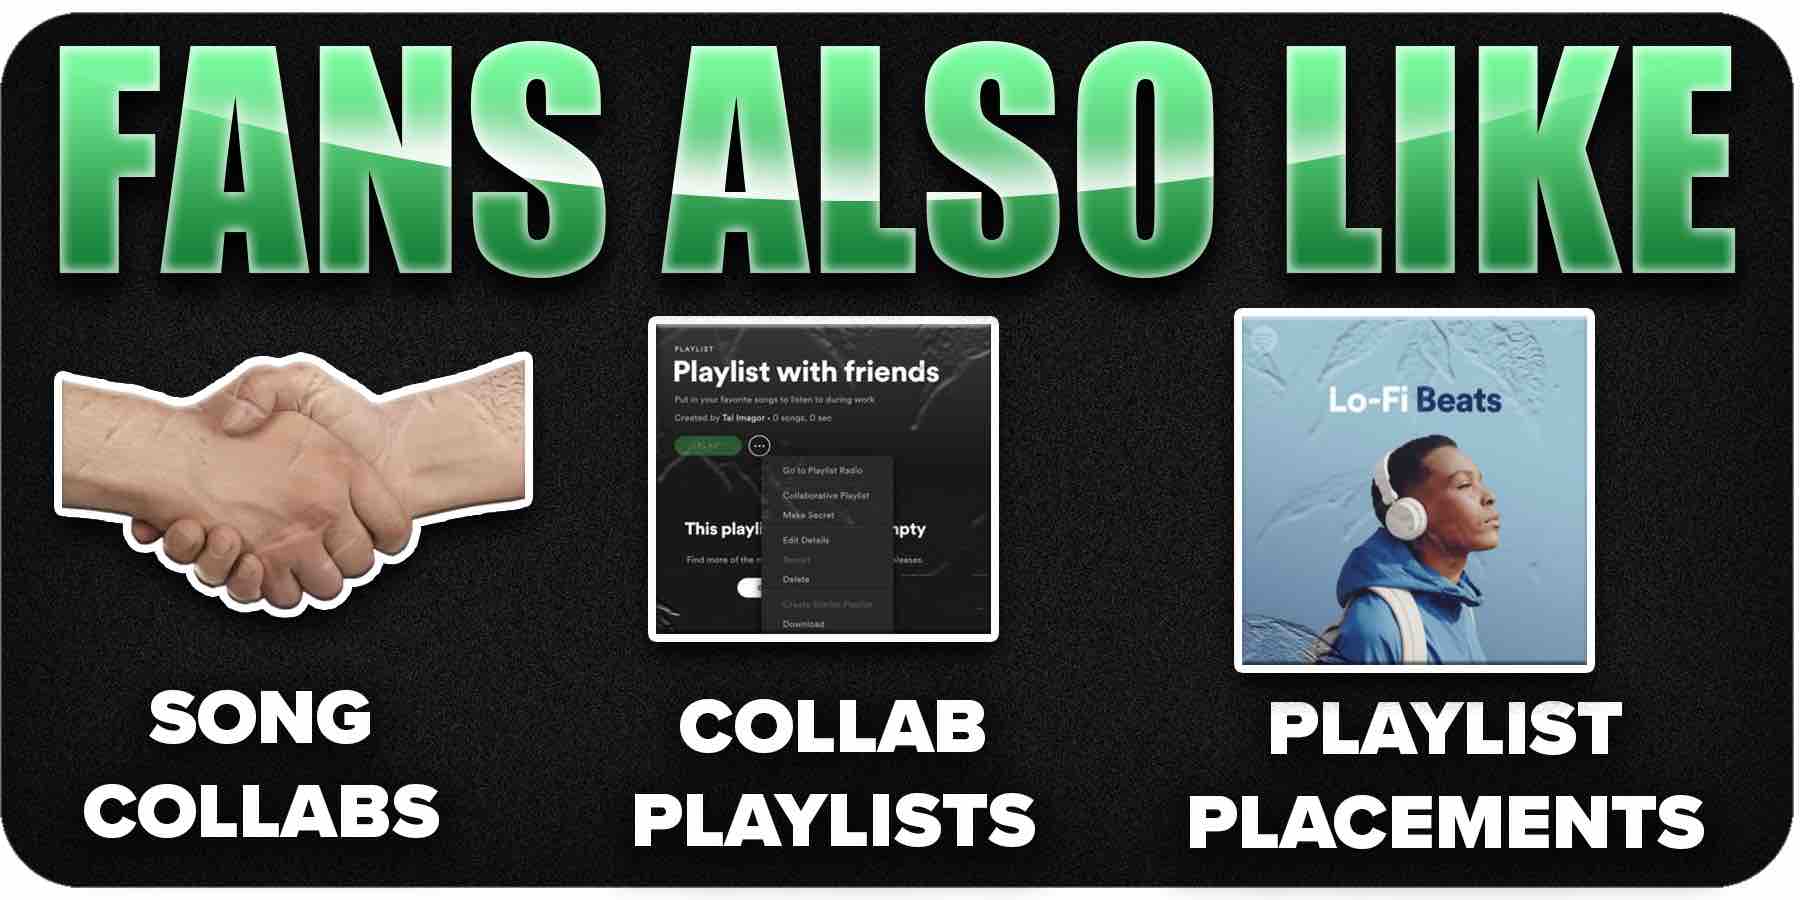 How to get Spotify Fans Also Like